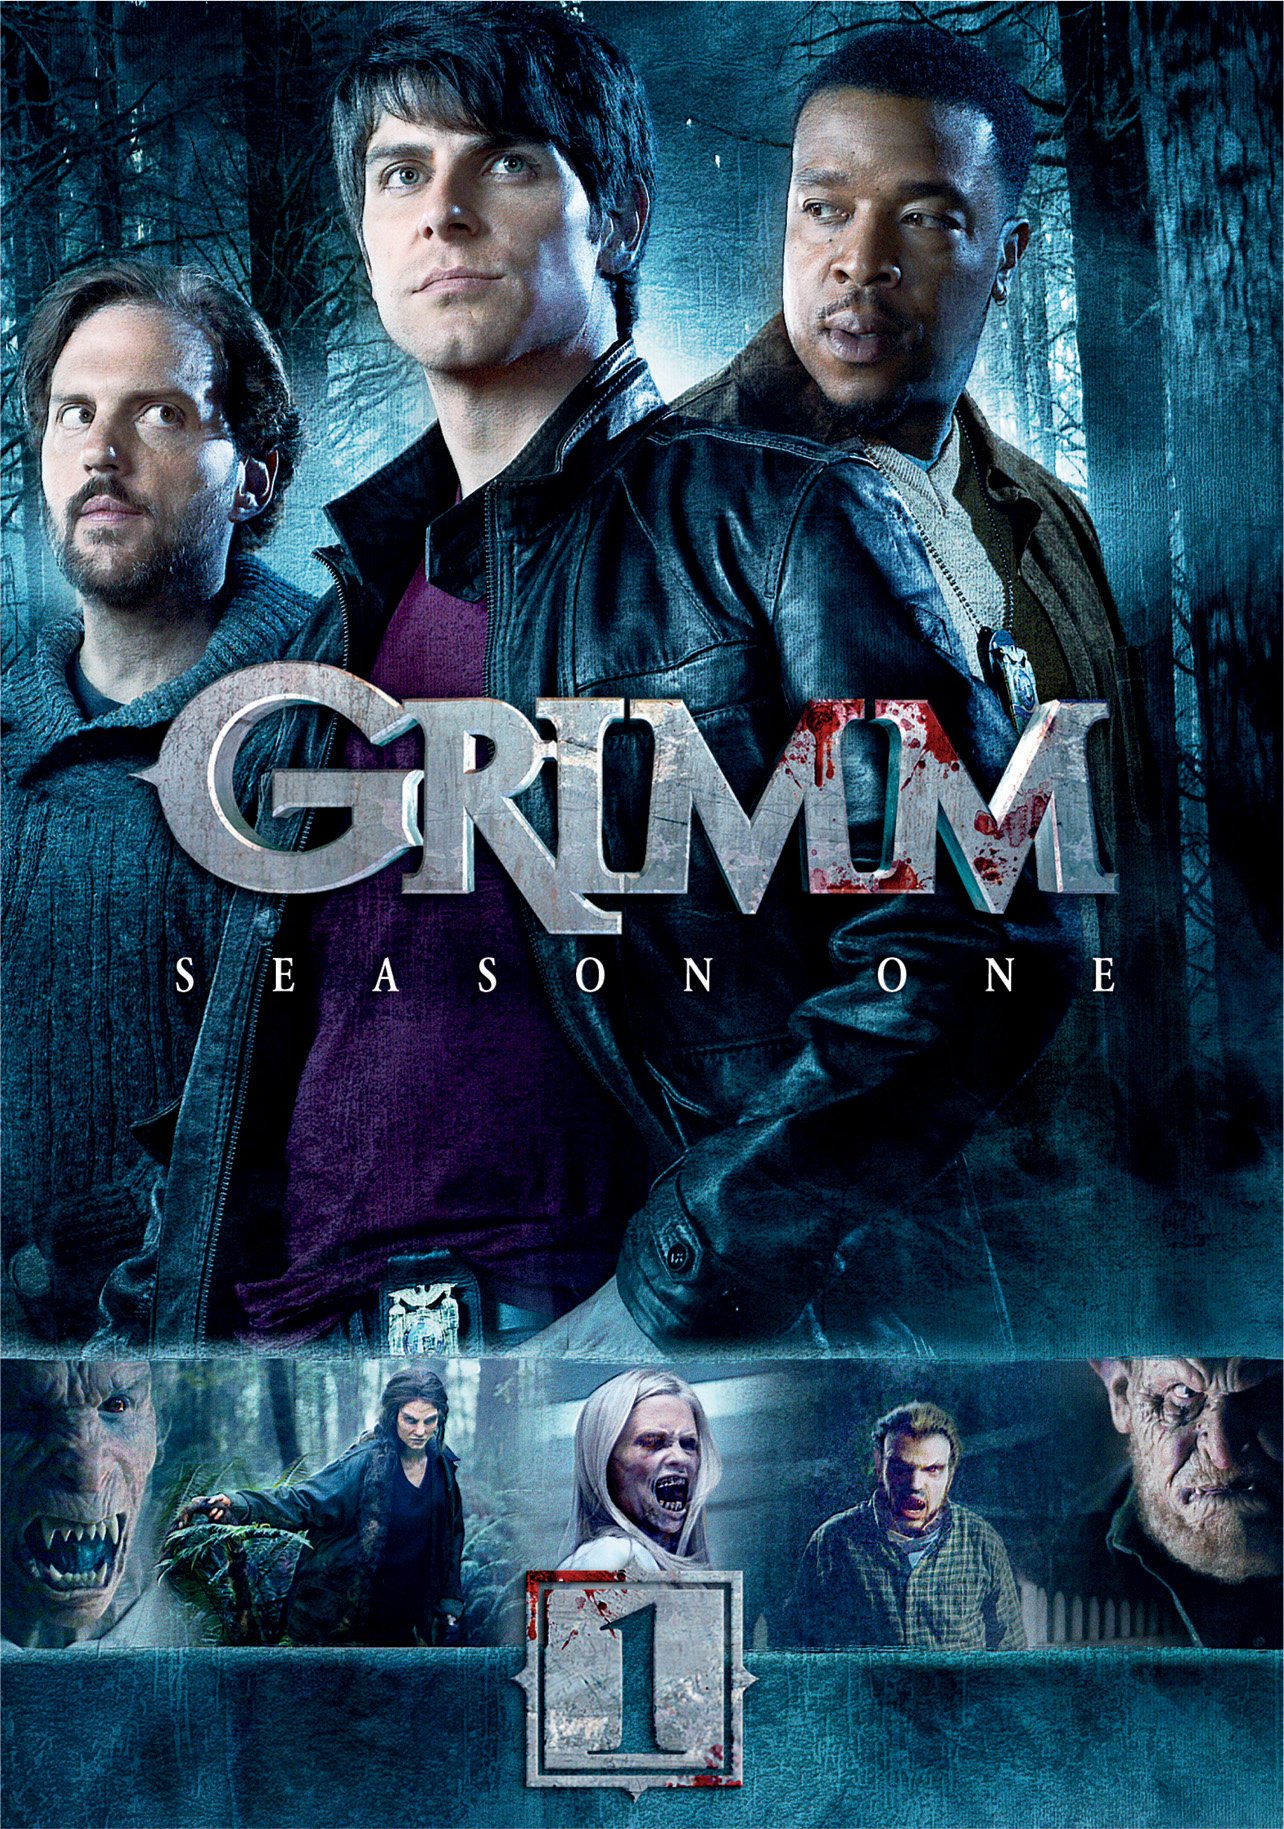 Free Download Grimm Season 3 Dvd Cover My Wallpaper 1284x19 For Your Desktop Mobile Tablet Explore 50 Free Nbc Grimm Wallpaper Free Nbc Grimm Wallpaper Grimm Wallpaper Grimm Wallpapers